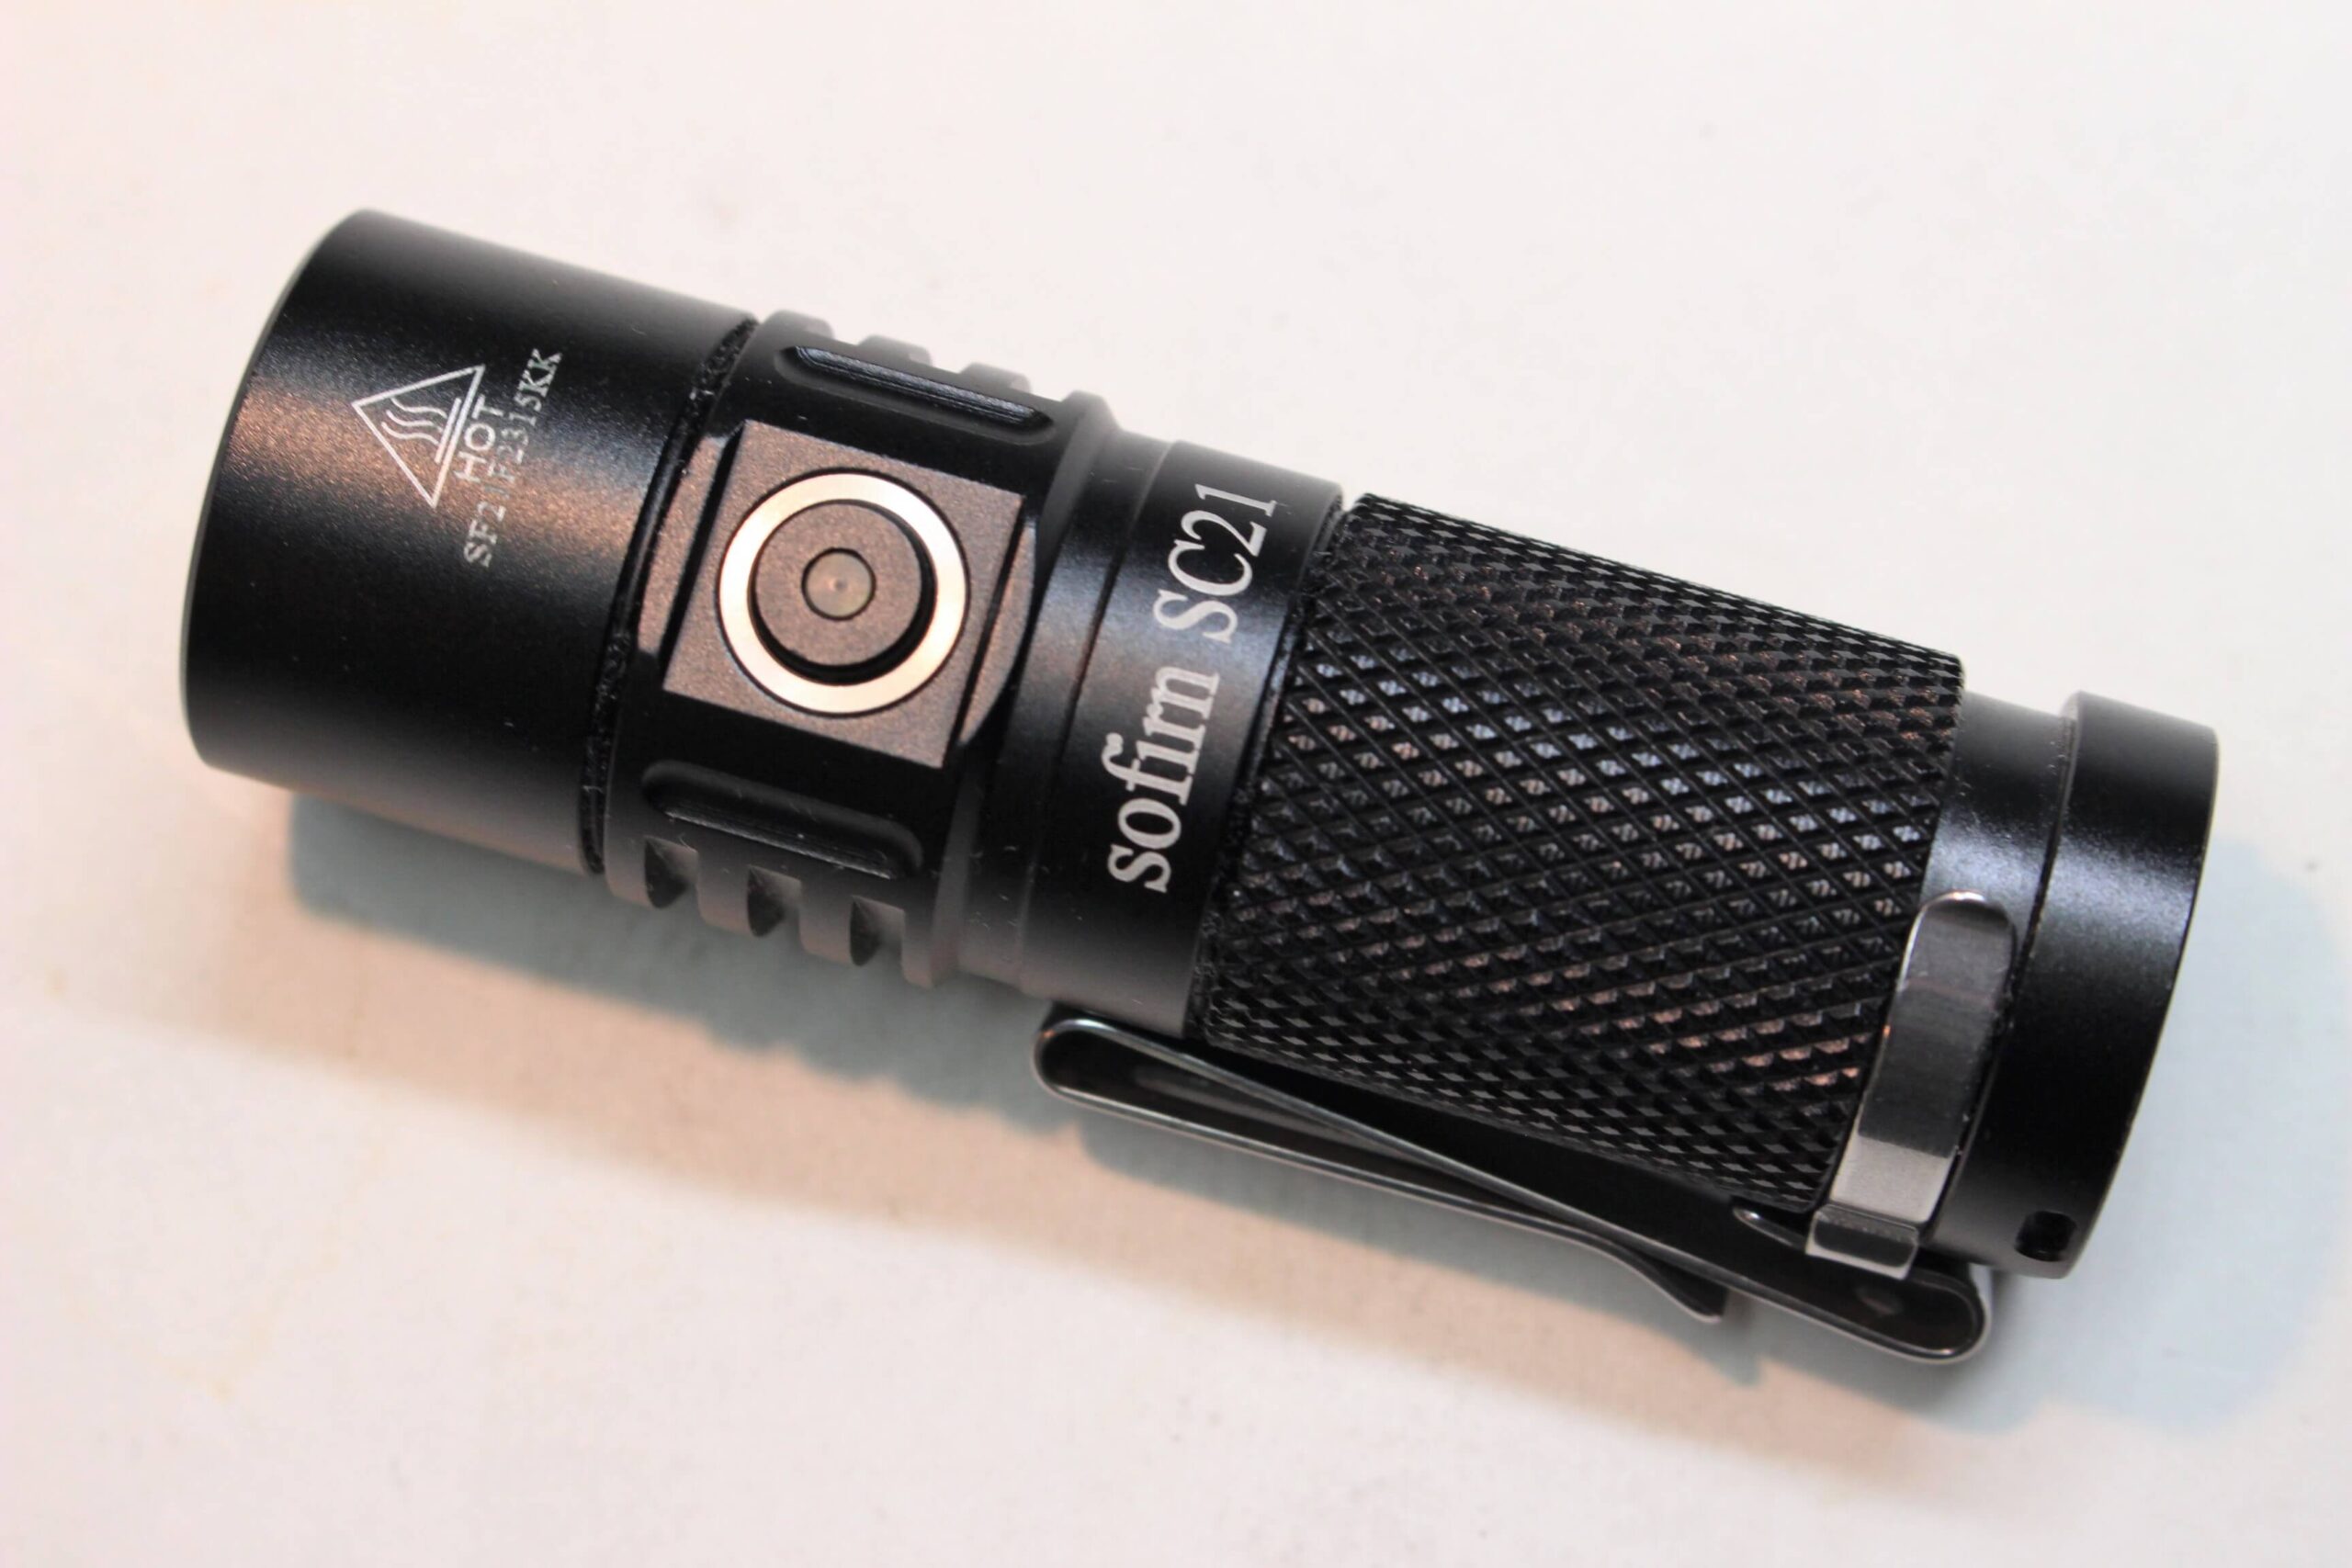 Sofirn SC21 Mini USB Rechargeable Flashlight Review 